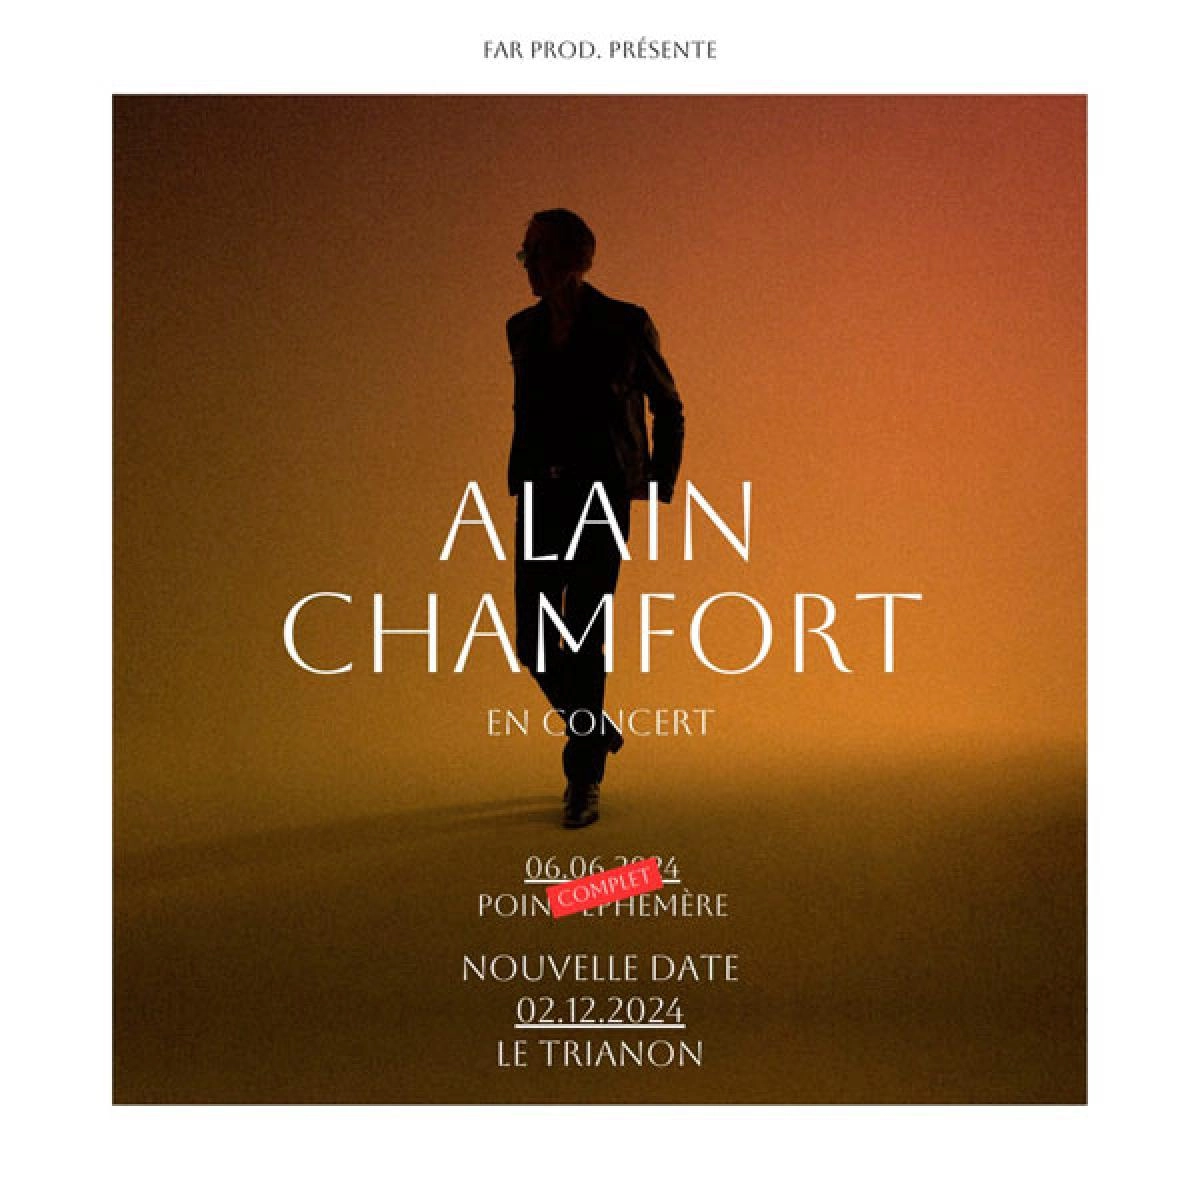 Alain Chamfort at Le Trianon Tickets